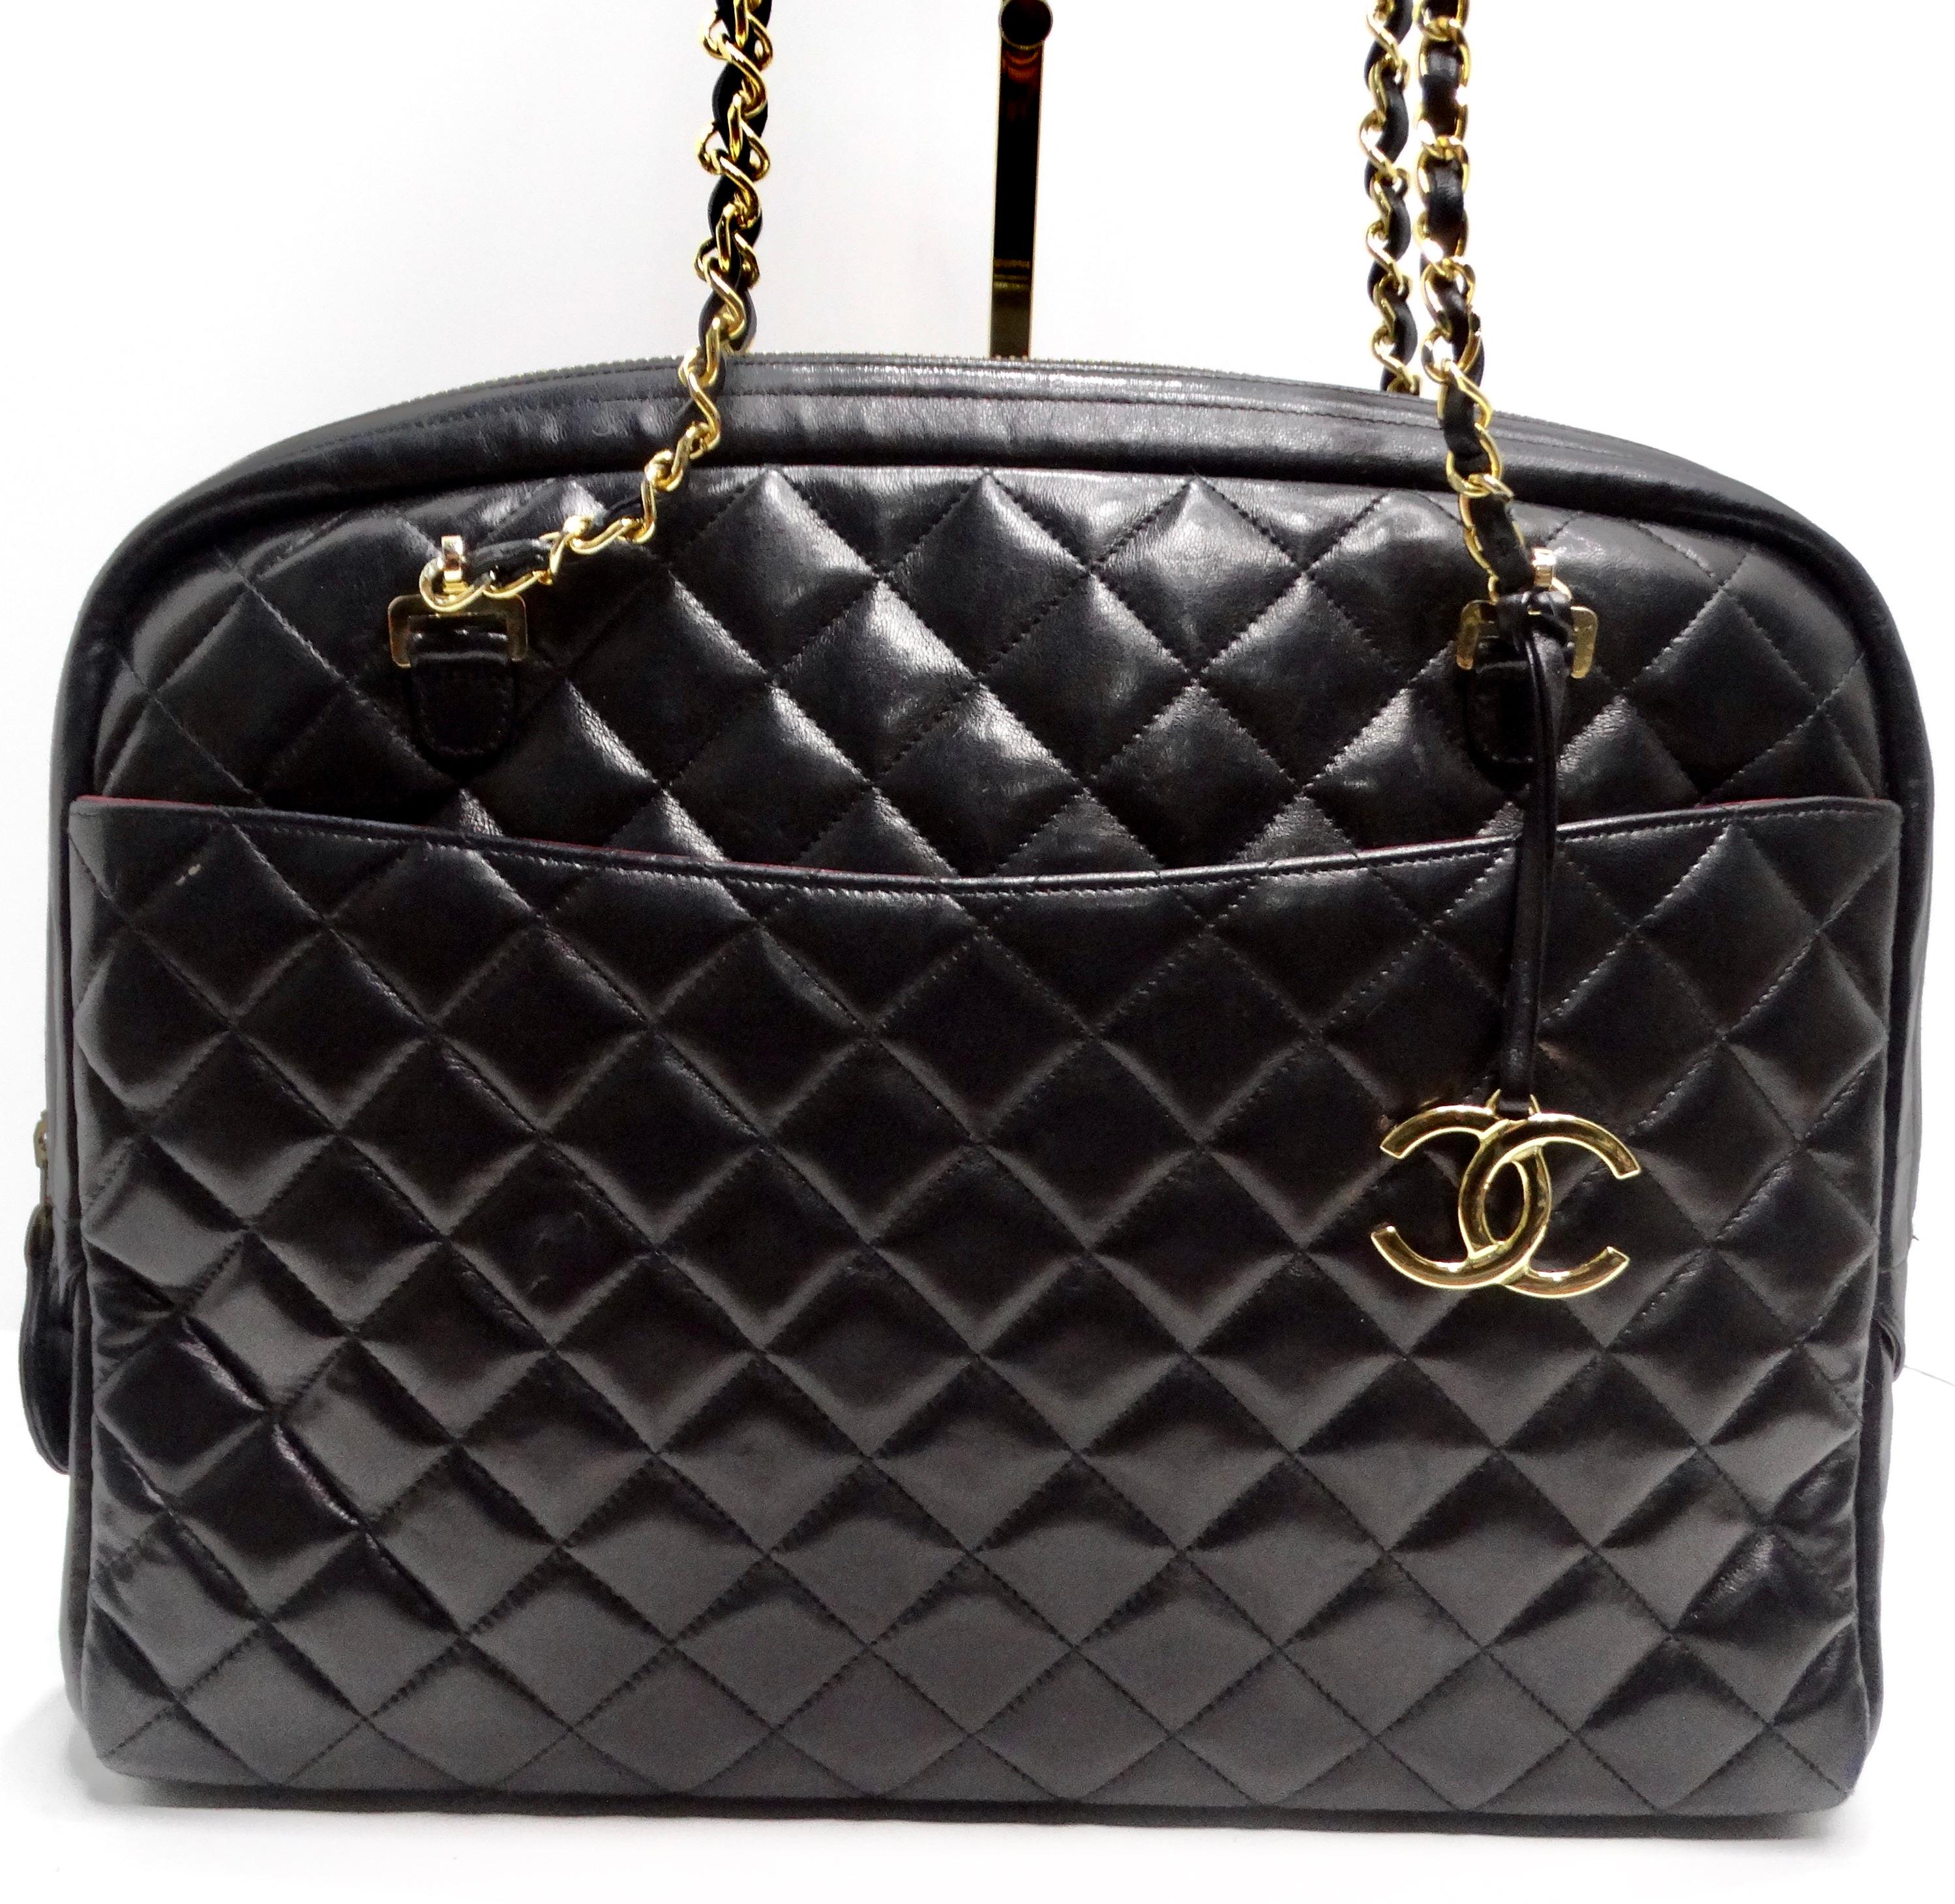 Introducing the Chanel 1980s Black Quilted Lambskin Camera Bag—a timeless and versatile piece that beautifully captures the essence of Chanel's iconic style. This camera bag is not just an accessory; it's a classic example of sophistication and